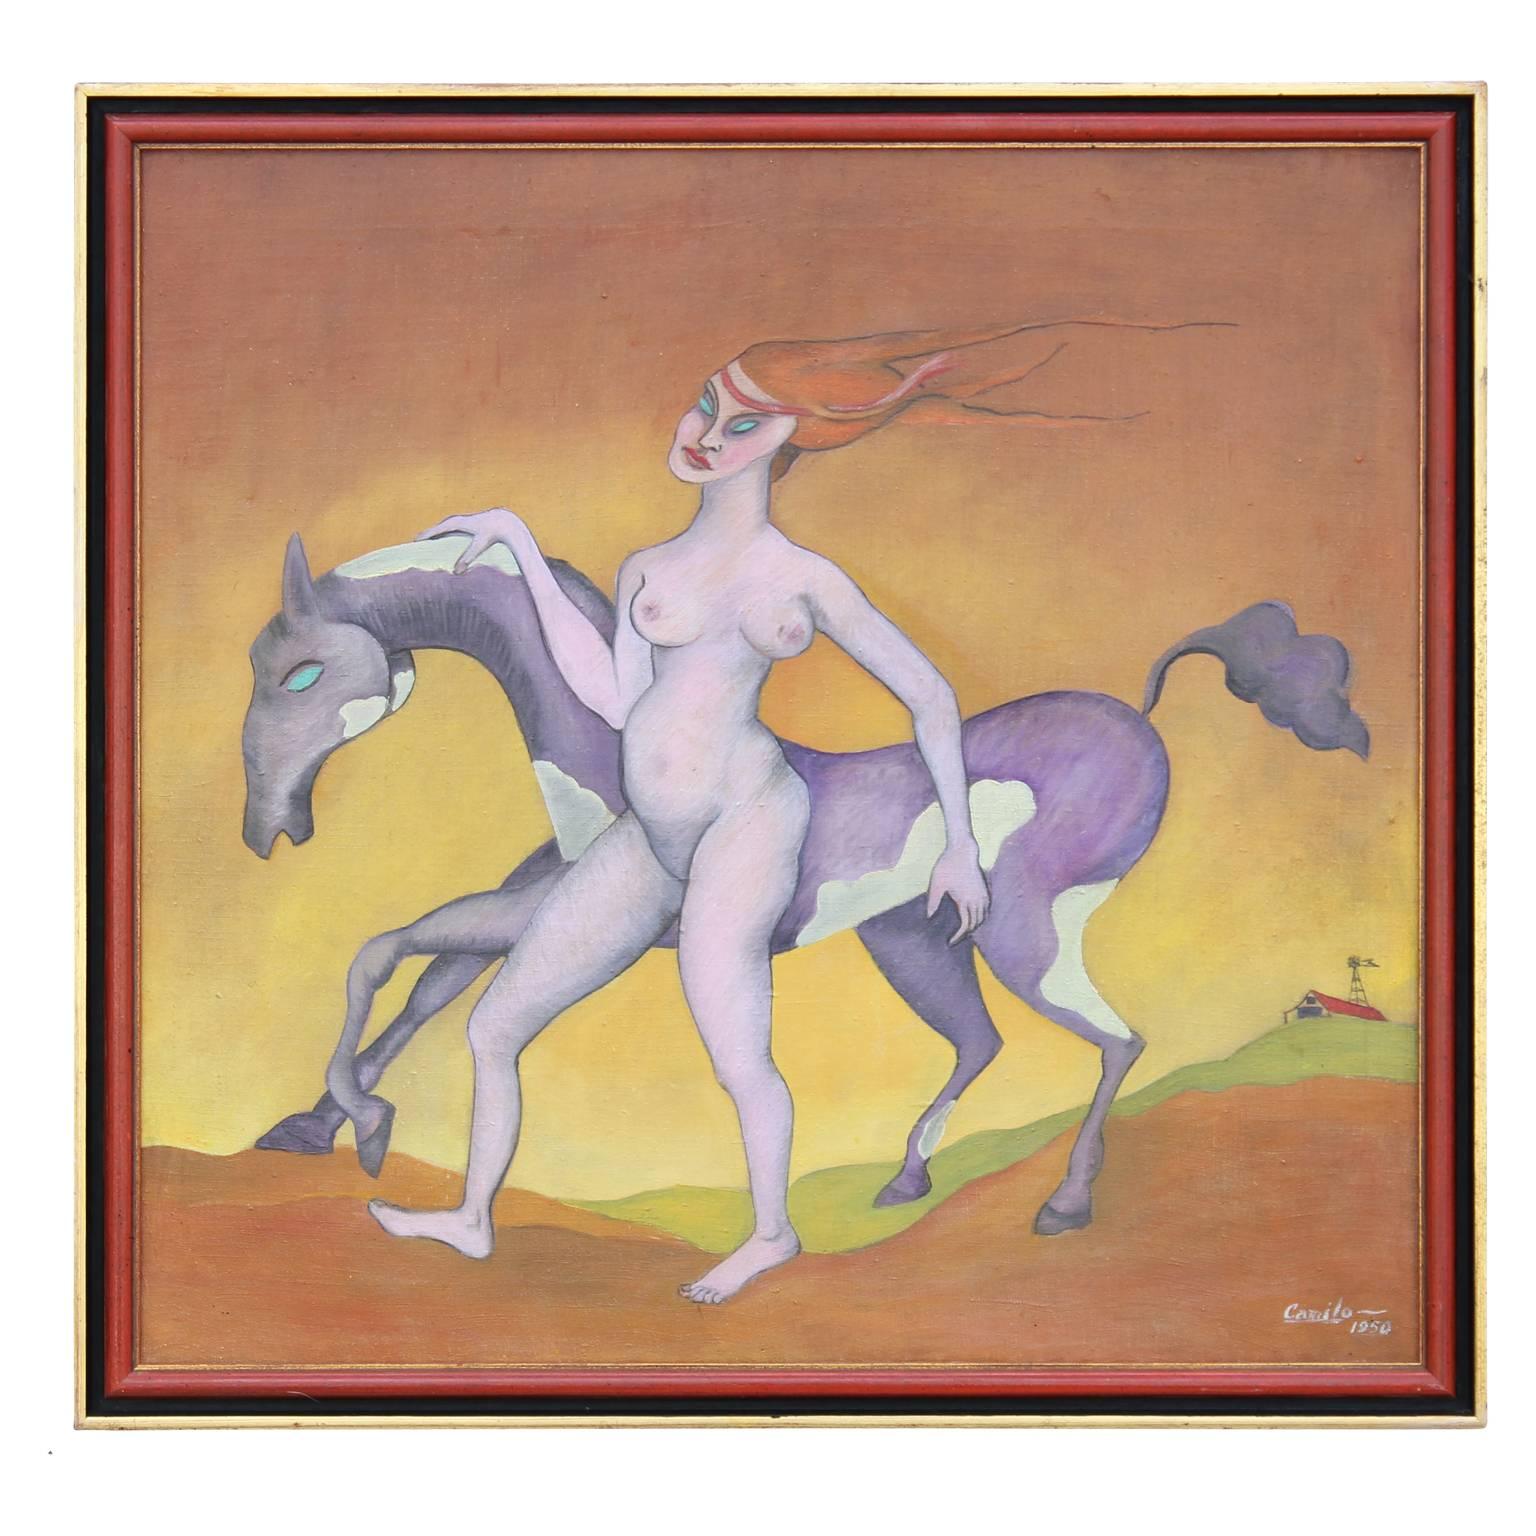 Camilo Nude Painting - Surrealist Painting of a Nude Woman and Horse